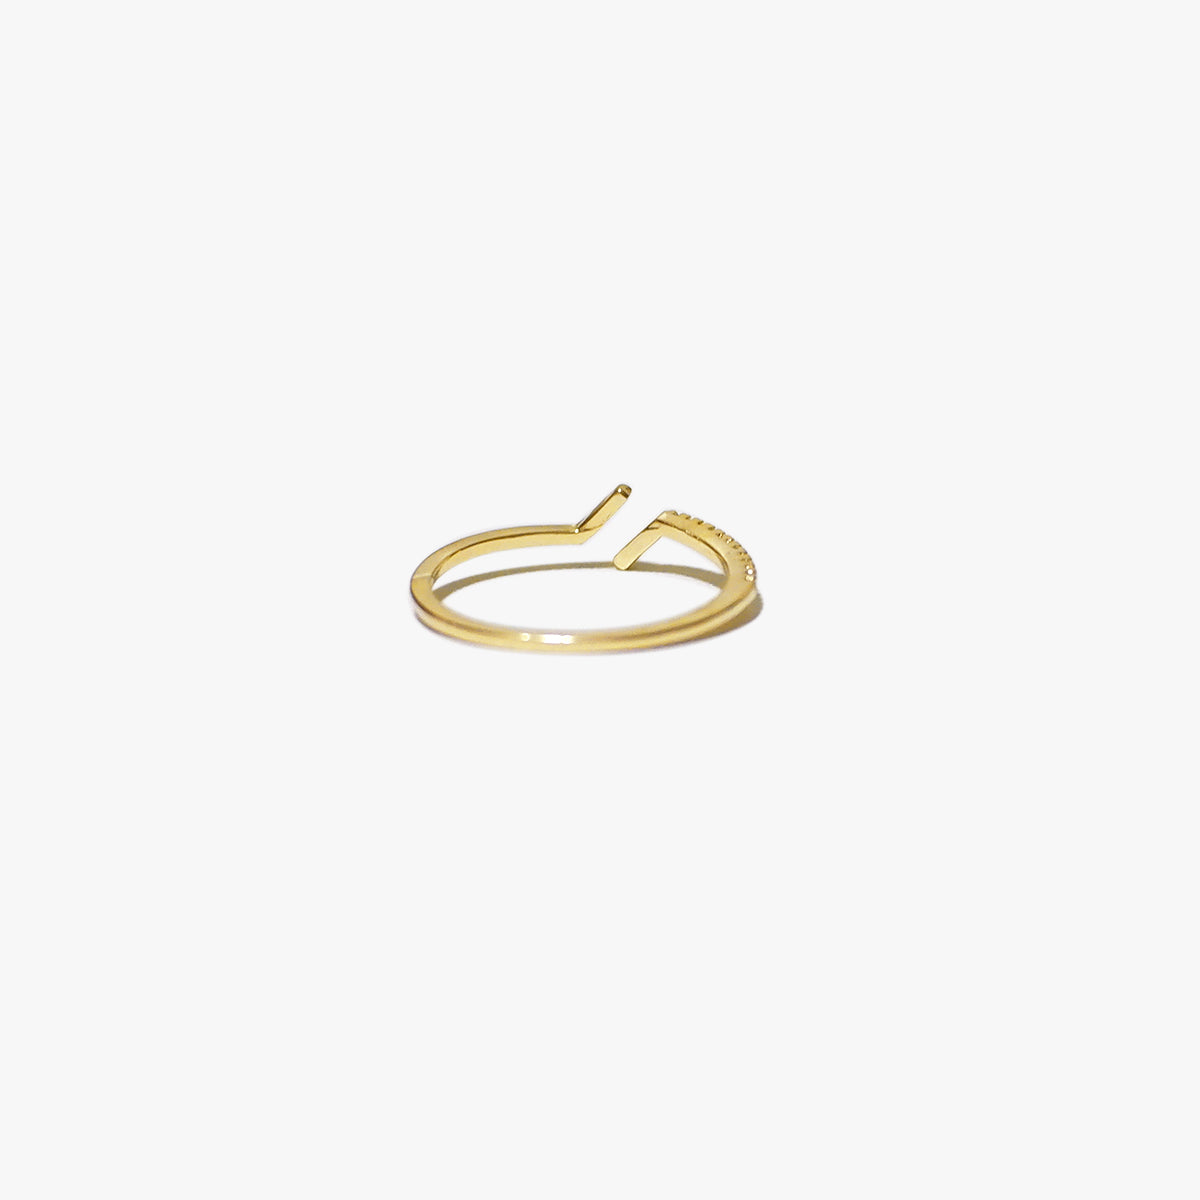 The Any-size Lennon Ring